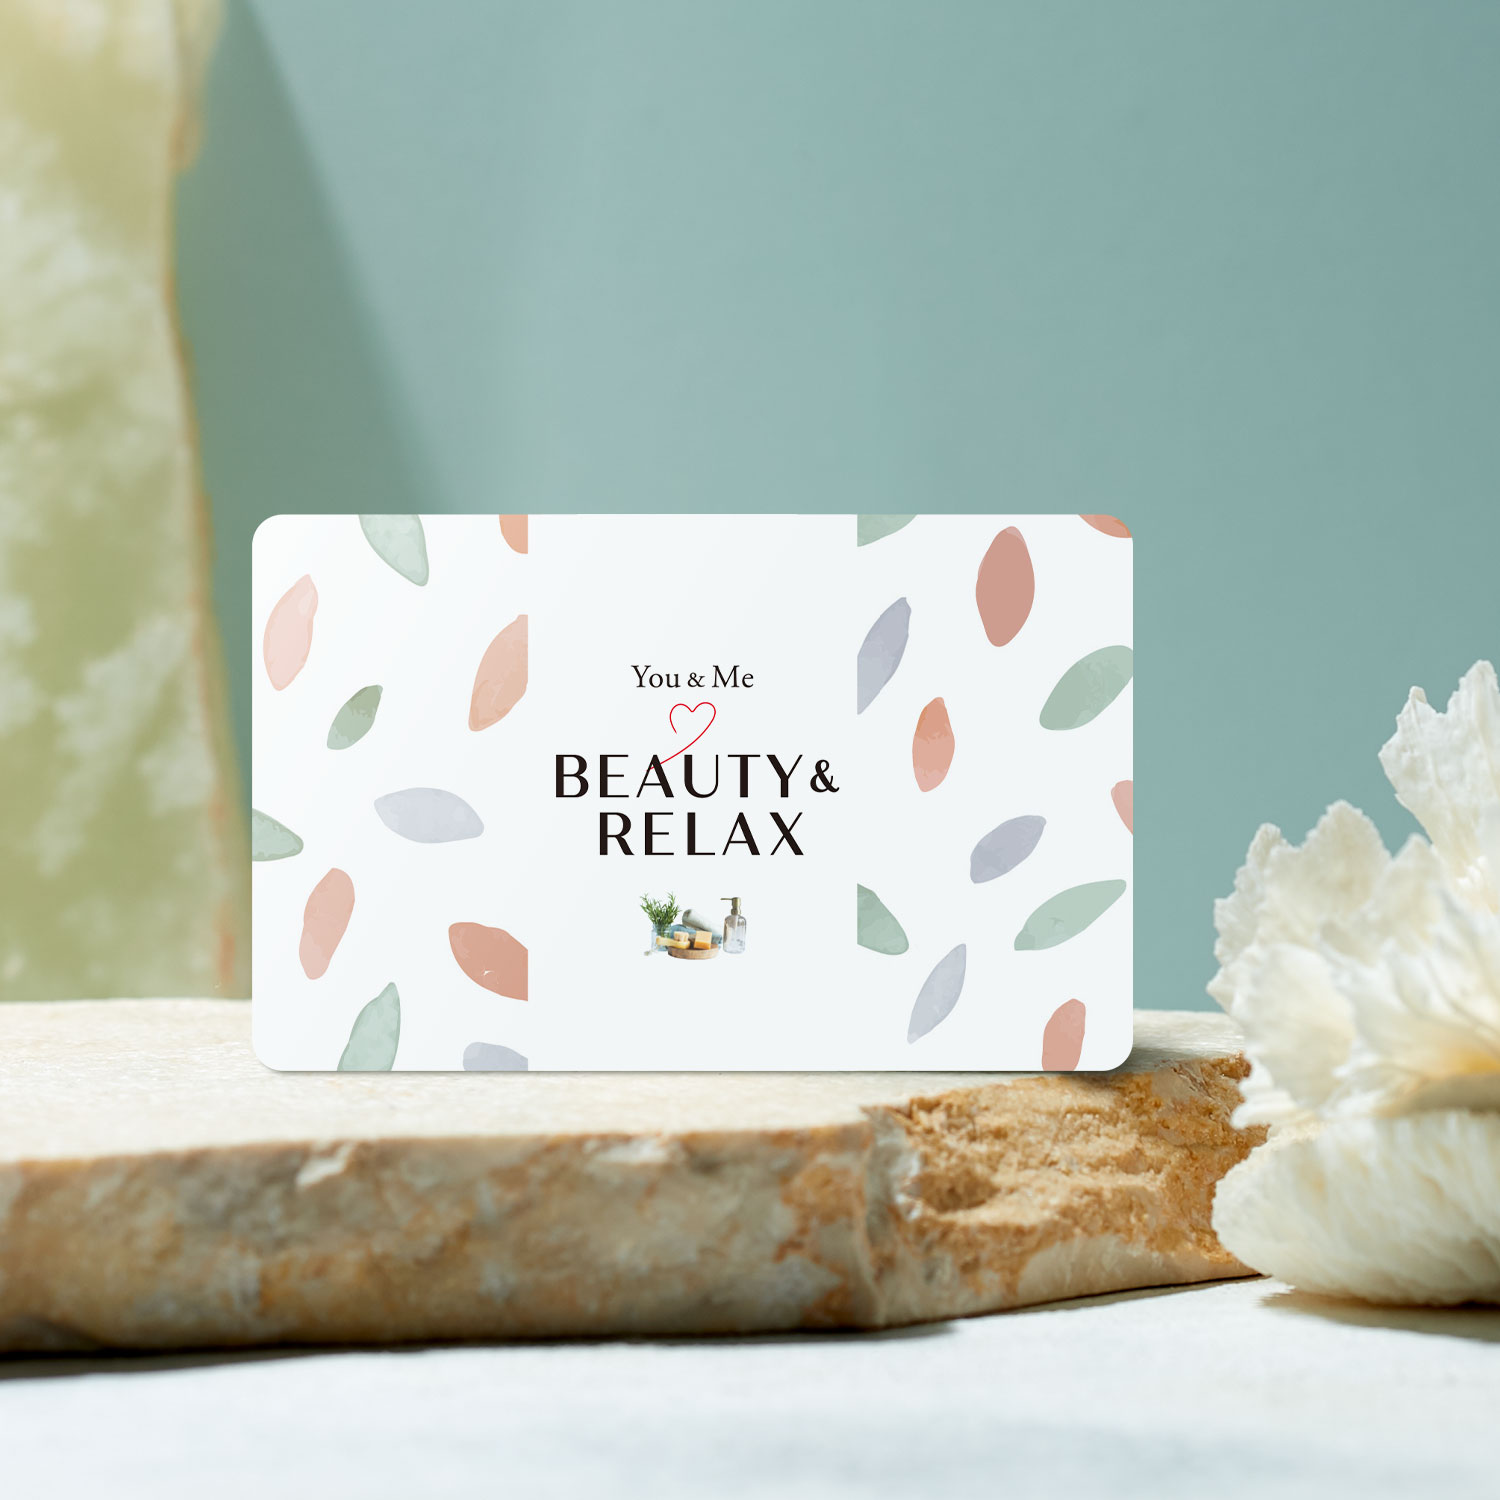 【You & Me】【送料無料】 【カードギフト】こころ、ととのう ご褒美ギフトカード「You & Me Beauty & Relax」CO